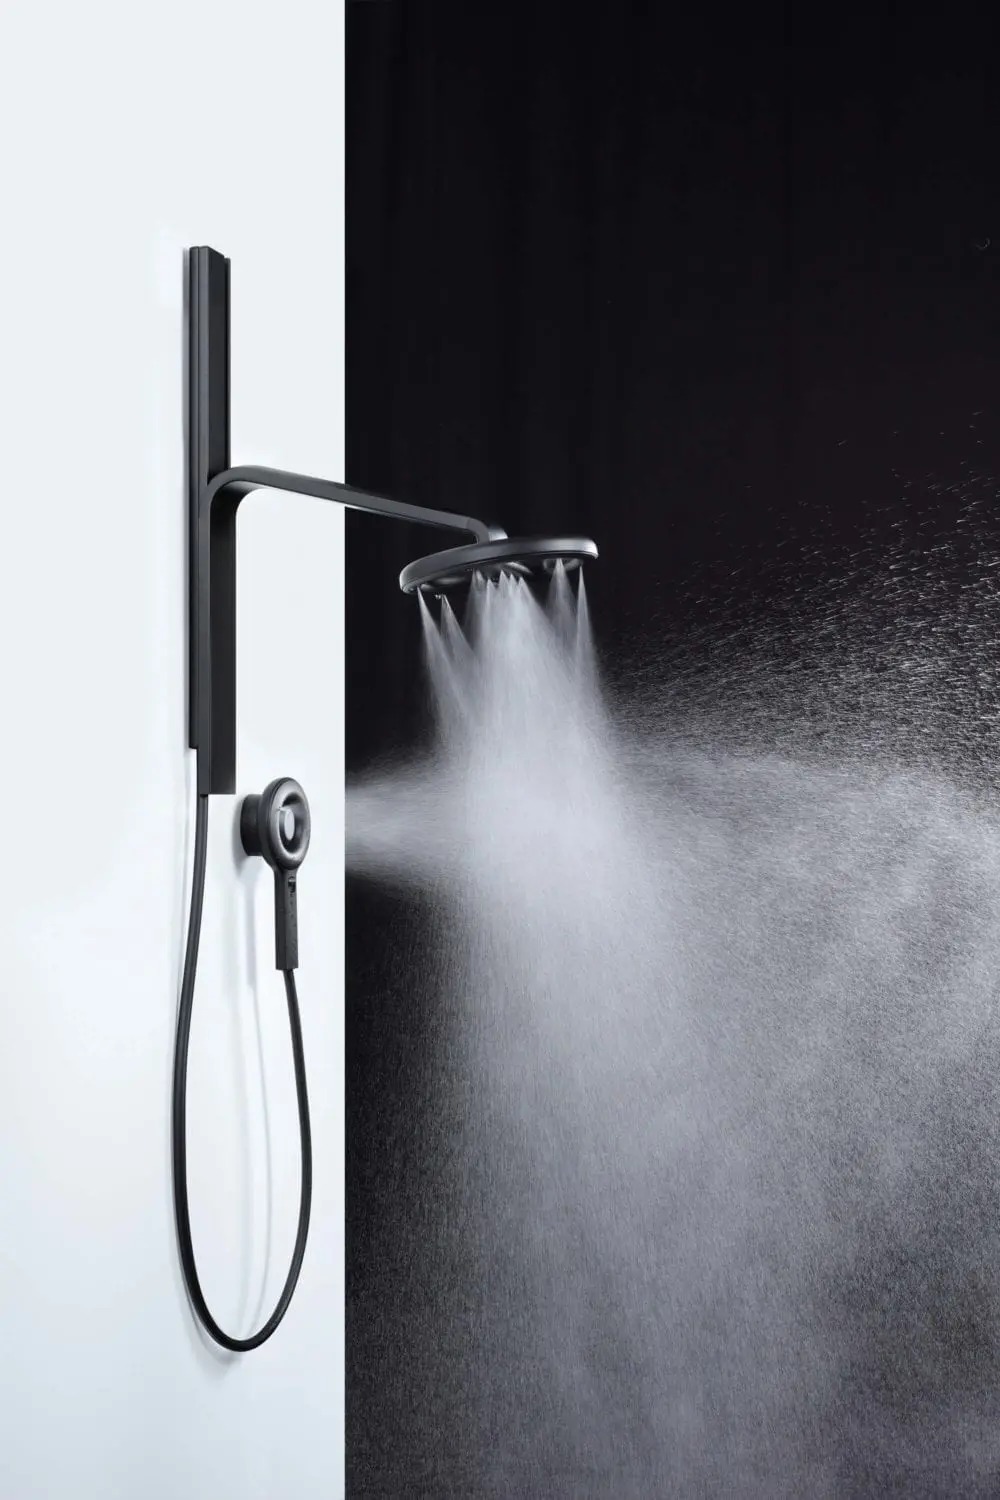 An adjustable shower arm is ideal for two-person master suites. This one is the Nebia adjustable showerhead by Moen